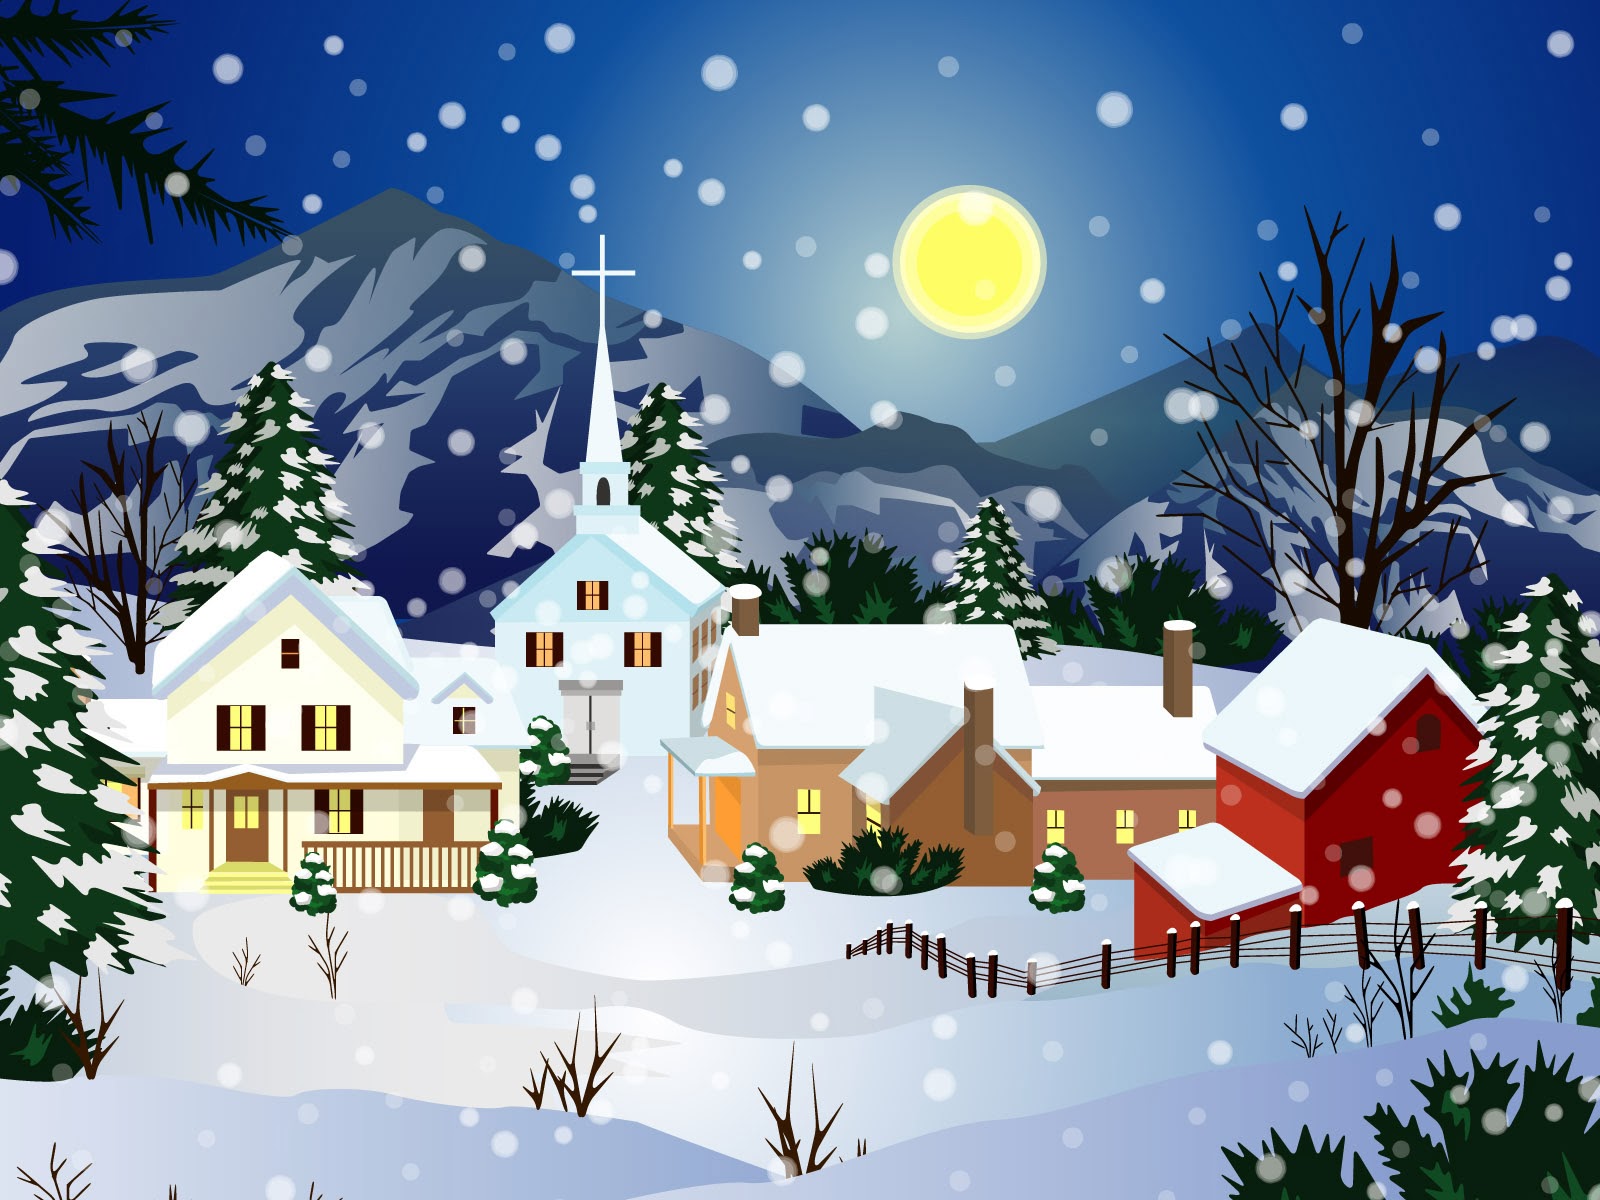 Sfondi Natalizi Android.Free Download Sfondi Natalizi Per Tablet Android Christmas Wallpaper For Android 1600x1200 For Your Desktop Mobile Tablet Explore 46 Christmas Tablet Wallpaper Free Wallpaper For Android Wallpapers For Android